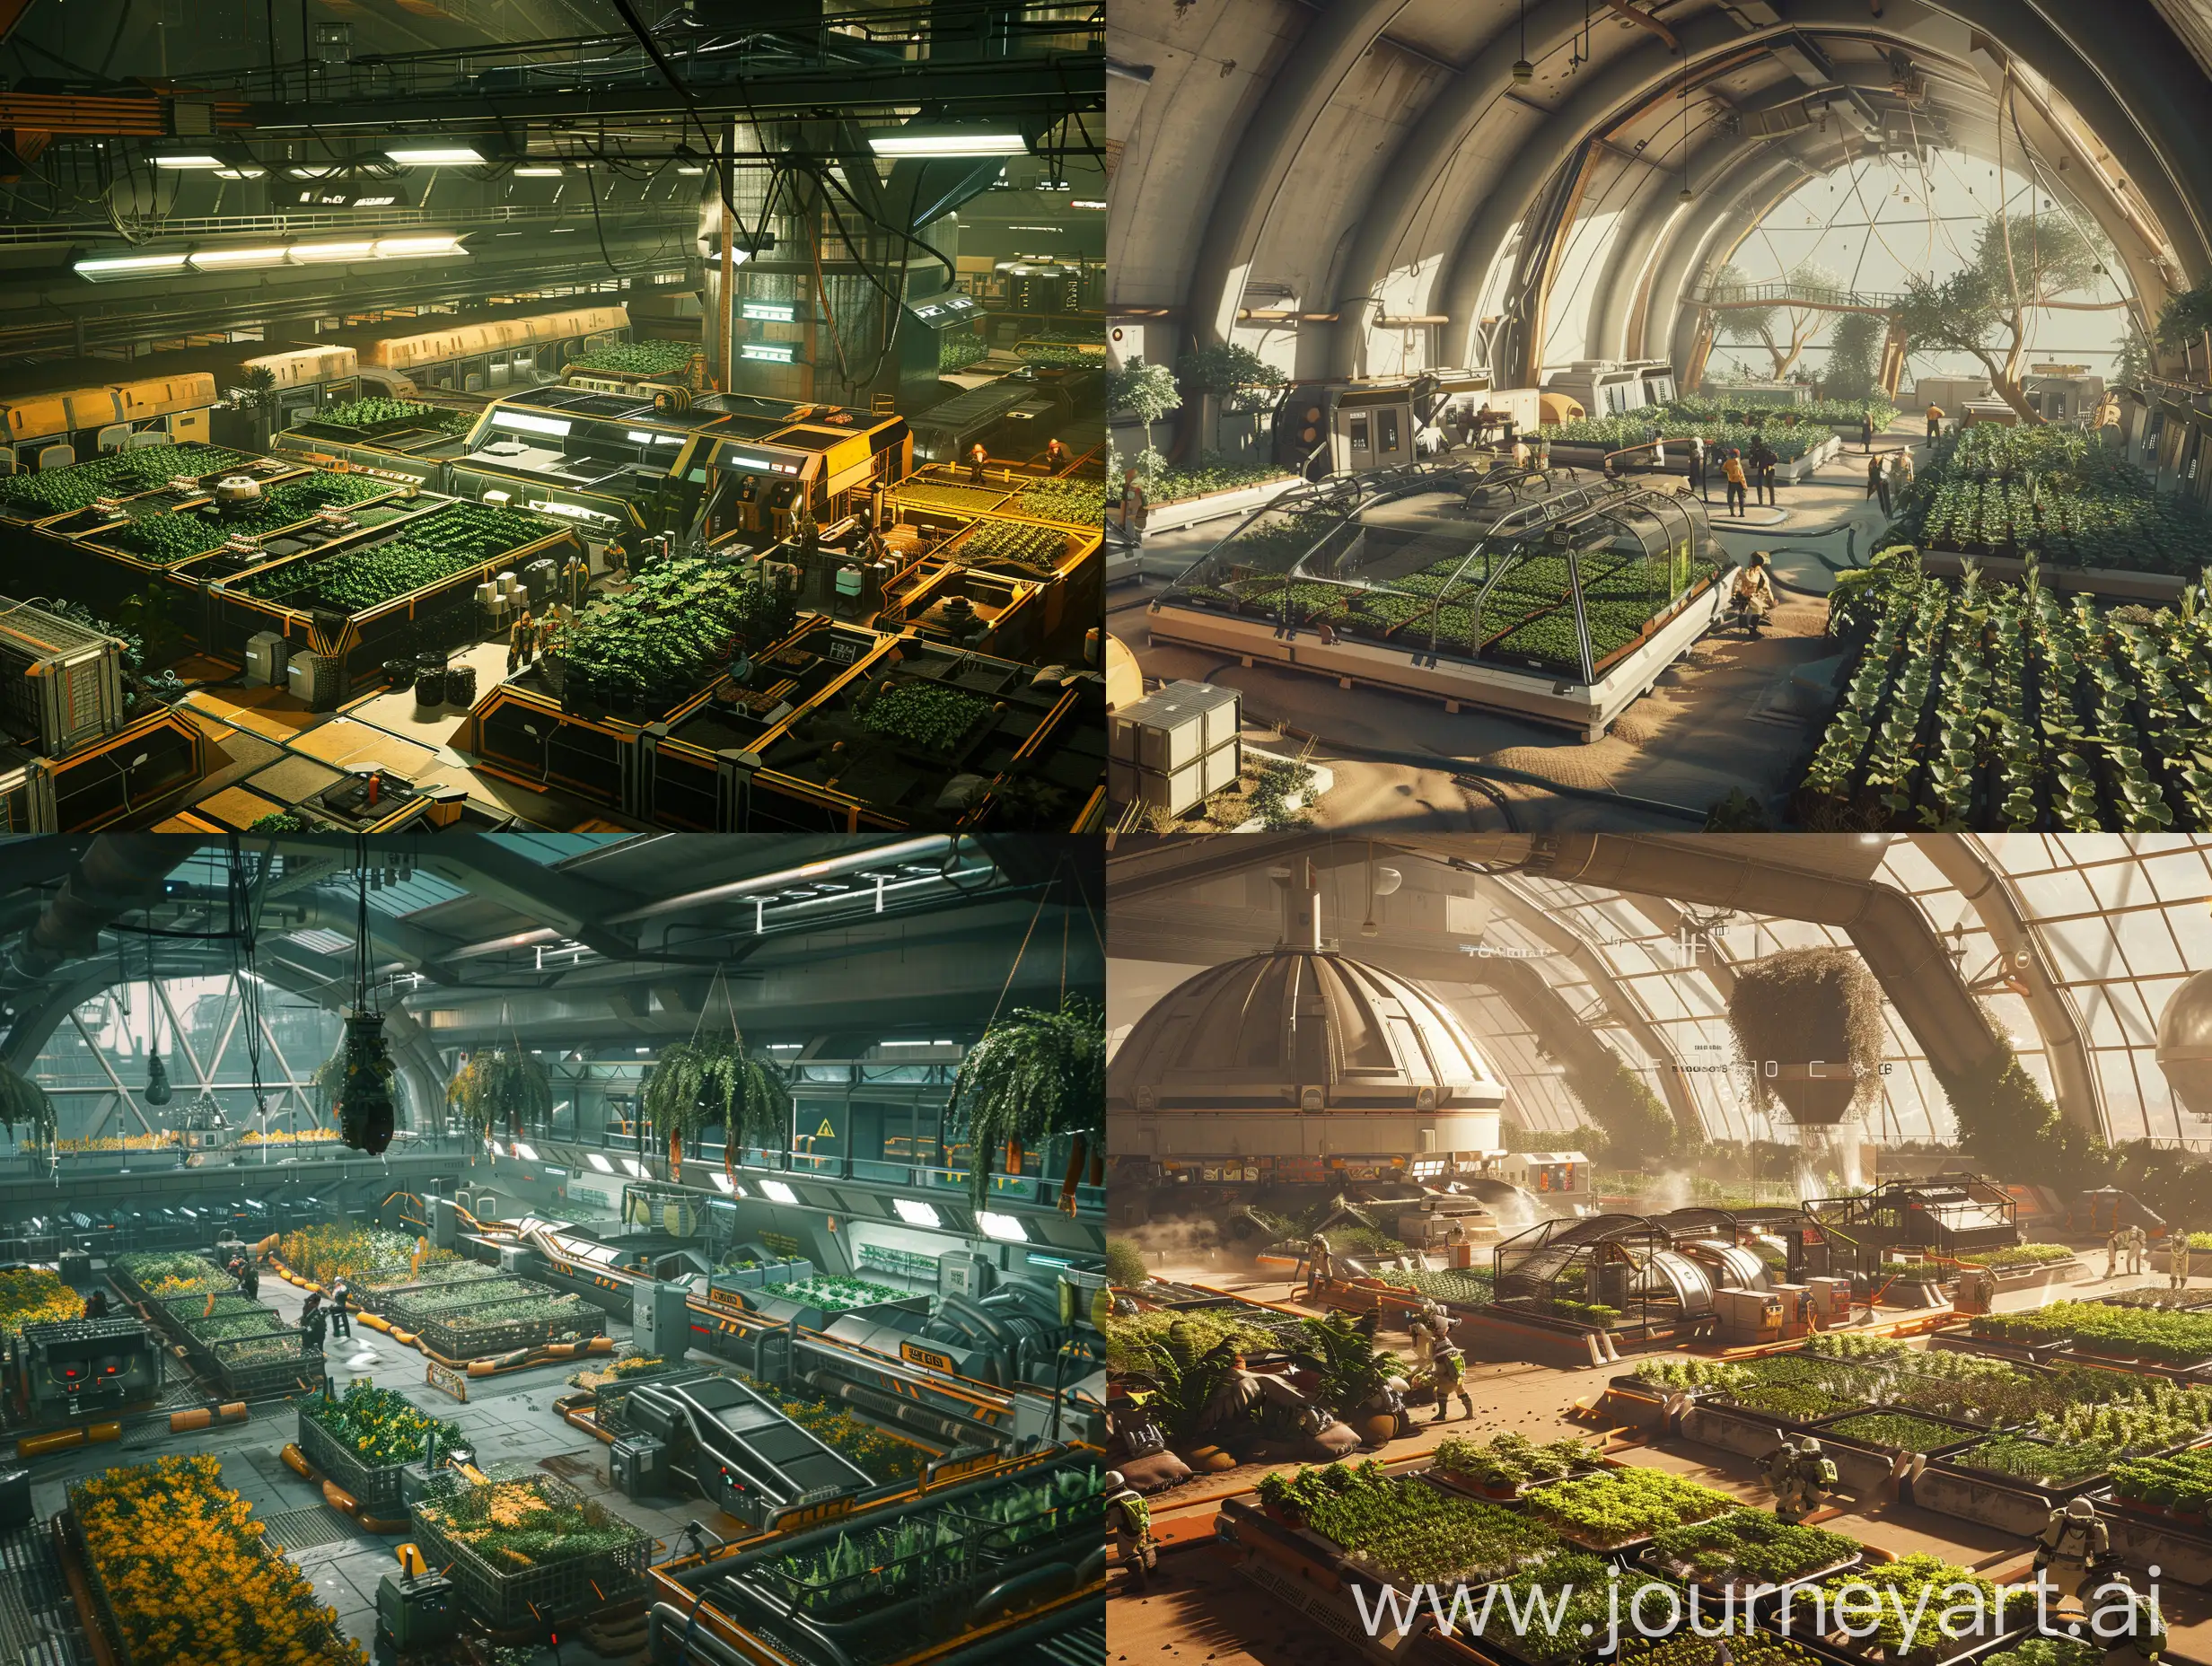 The location is a large agricultural base. a complex for growing crops
with a settlement of colonists working on it. There are many technical rooms on the base about hydroponics and plant breeding. brutalism
star citizen style. interesting architectural design. 8k unreal engine